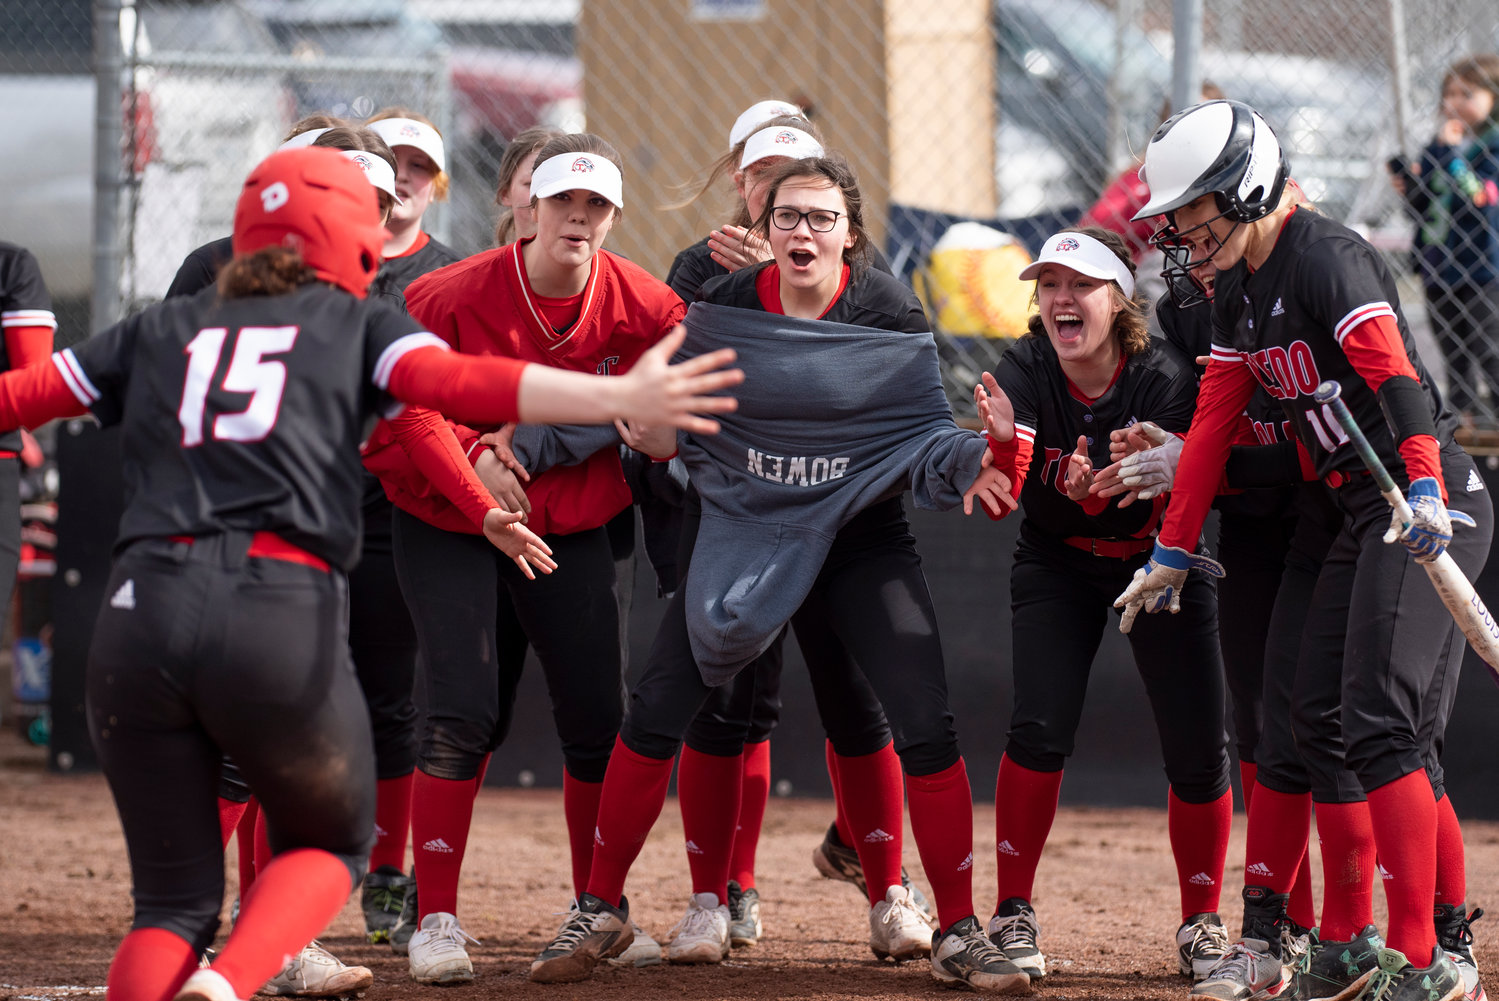 Toledo players greet Abbie Marcil at home plate after Marcil hit a home run on the road against Tenino on March 16.